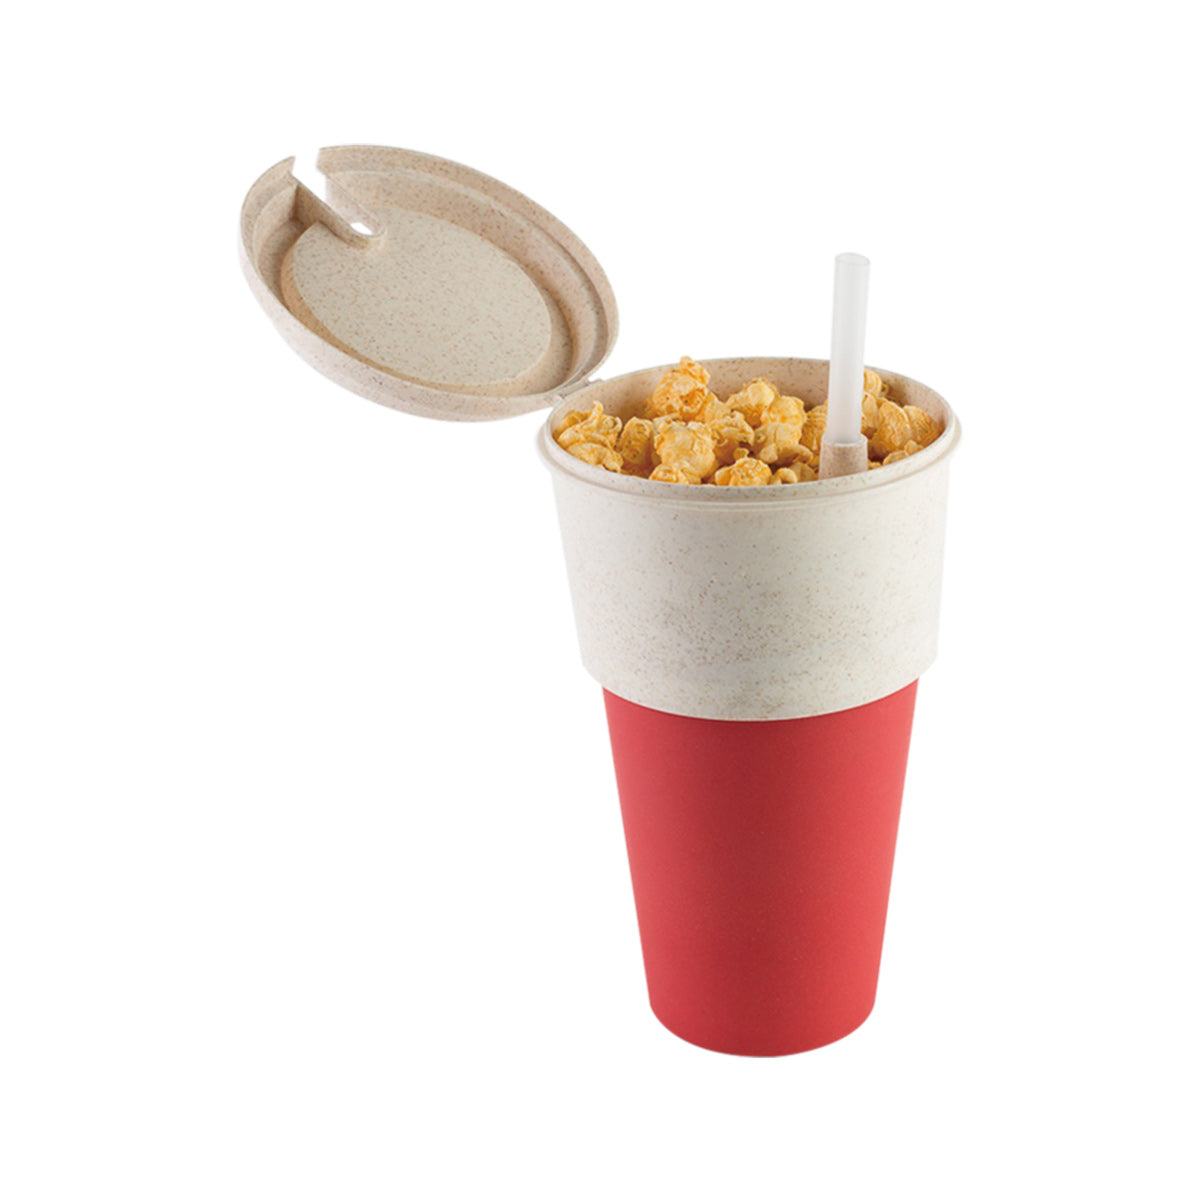 Snack/Popcorn and Drink cup by Peterson Housewares & Artwares